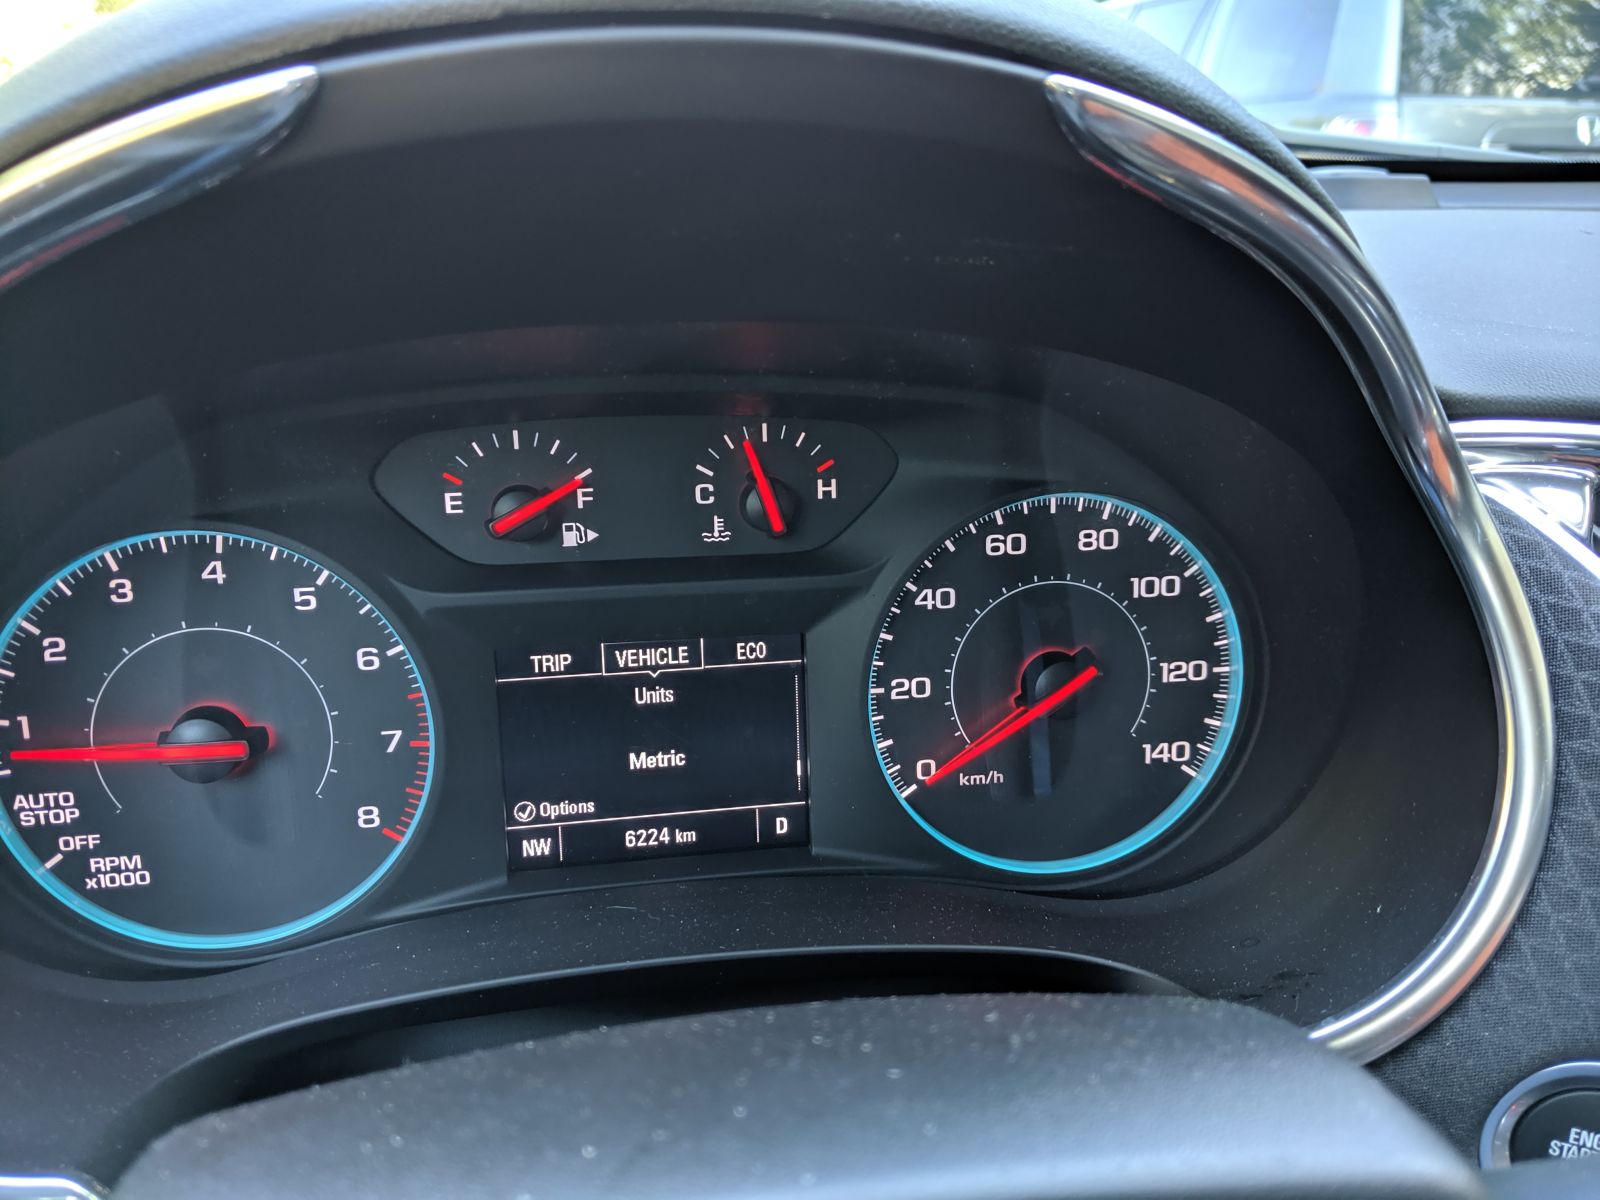 This rental-spec car didn’t have a colour display. Not a functional weakness but still noteworthy. More noteworthy is the selectable speedo units. The dial literally jumps when you swap mph/kph while moving.